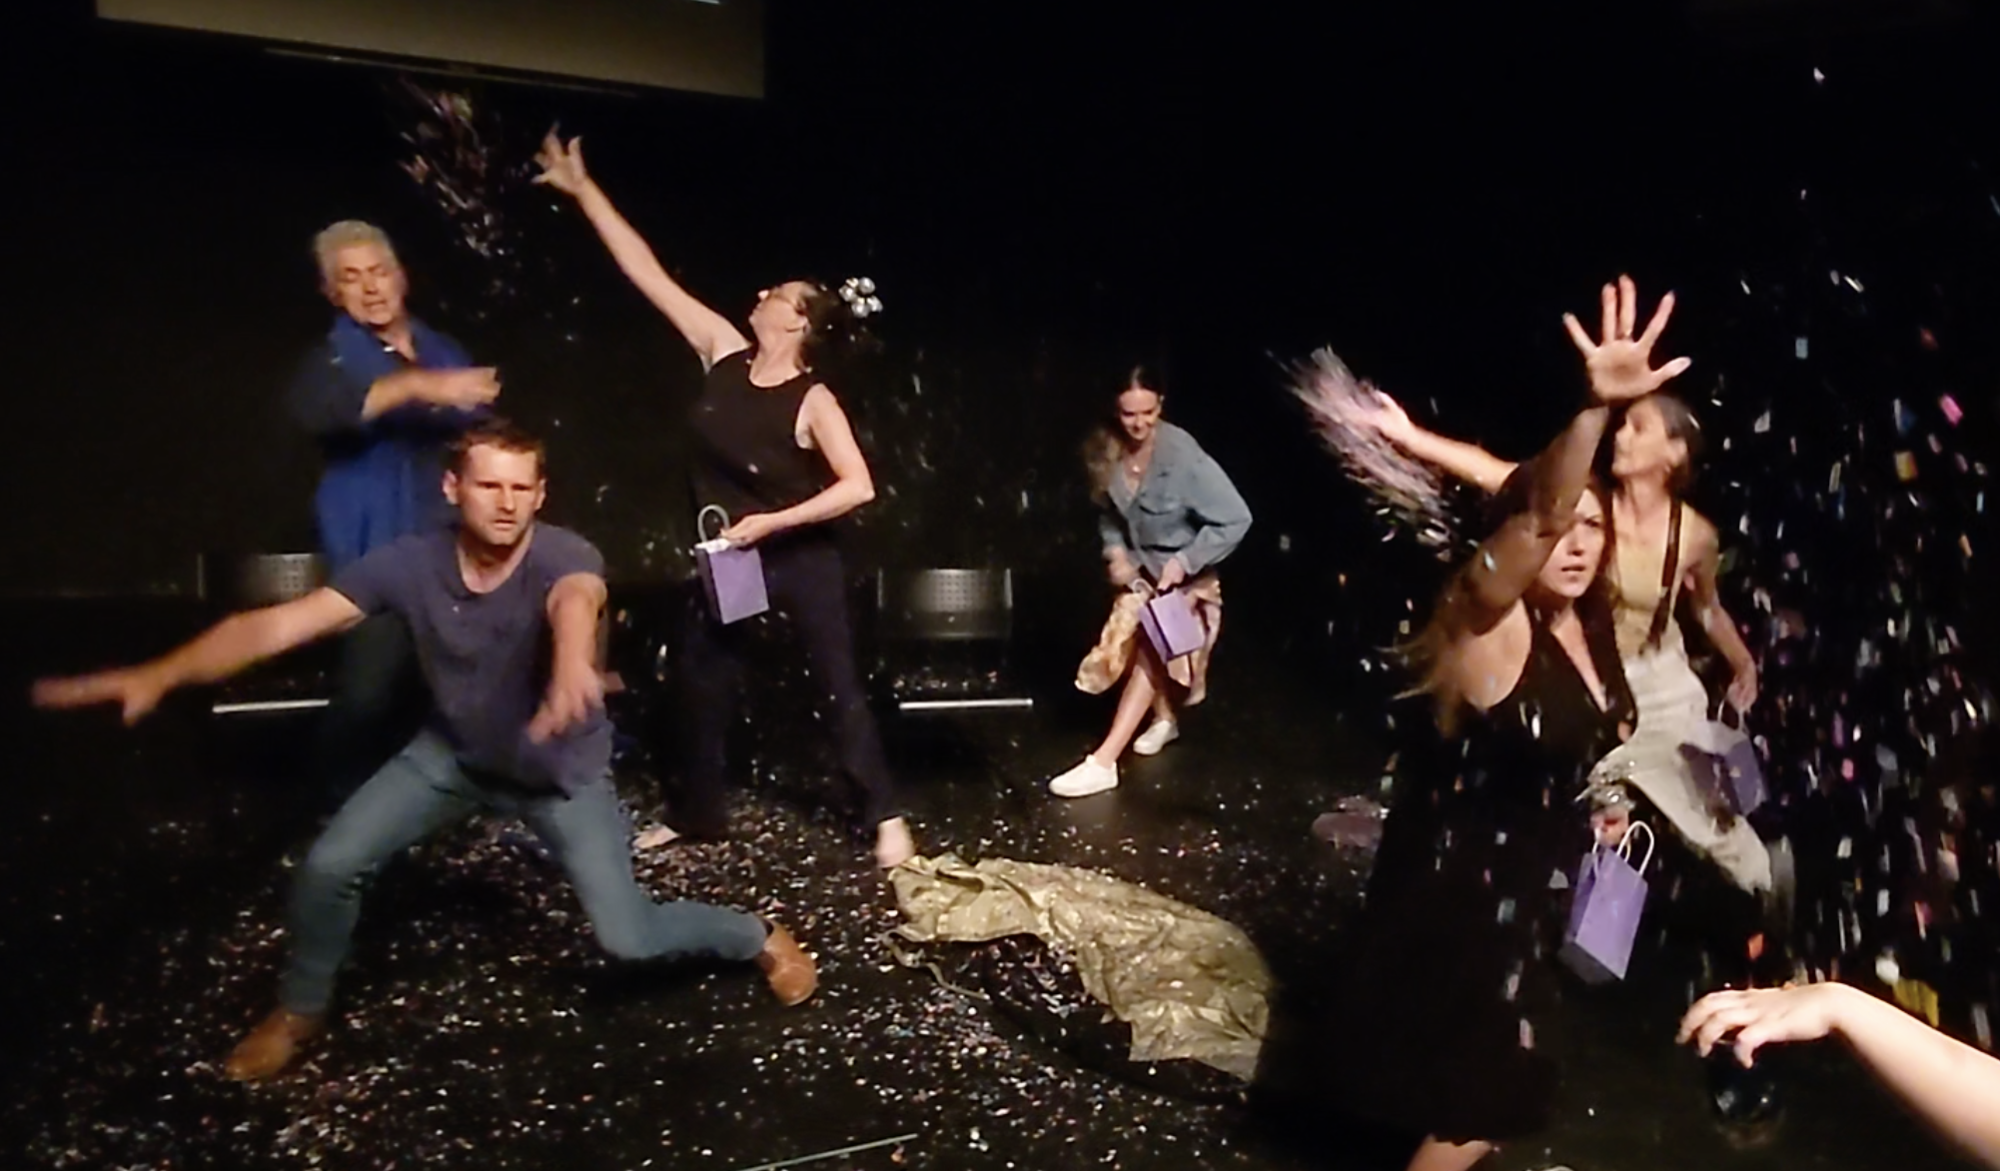 six performers move jovially through a dark performance space, throwing confetti all over the room